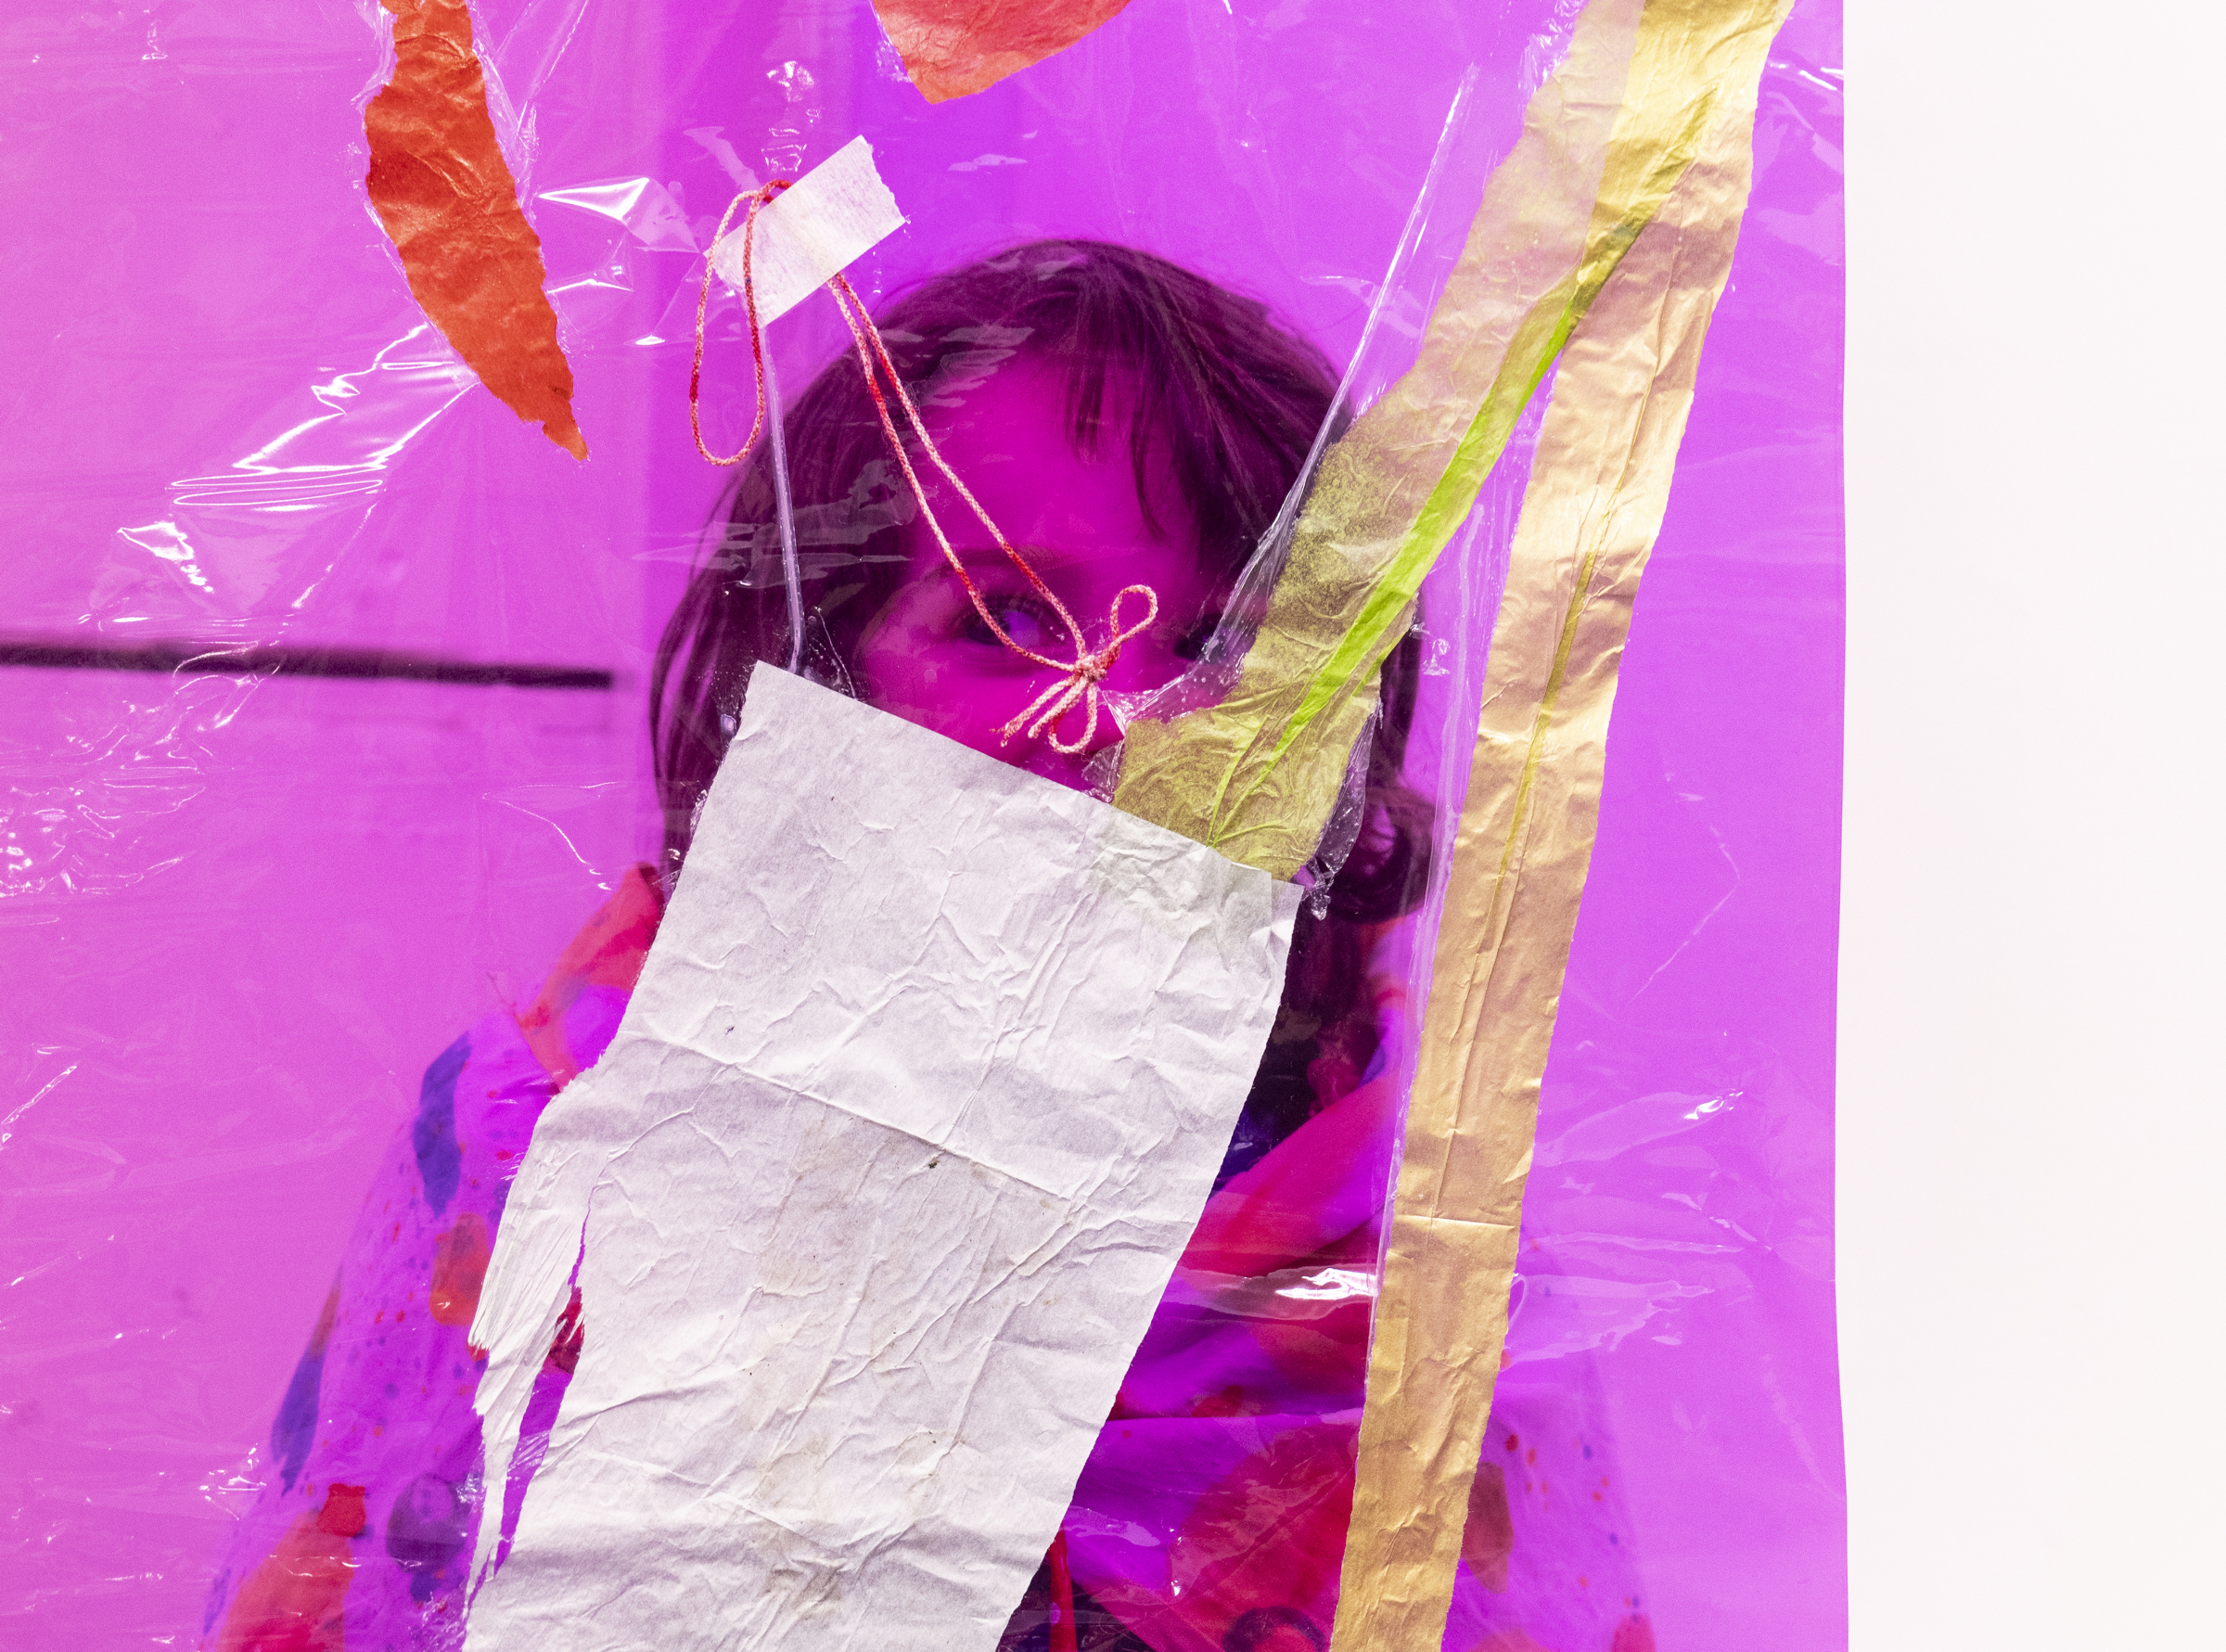 Image description: Closeup of a child's face looking through a large piece of pink cellophane decorated with coloured tape and string, in an art exhibition.